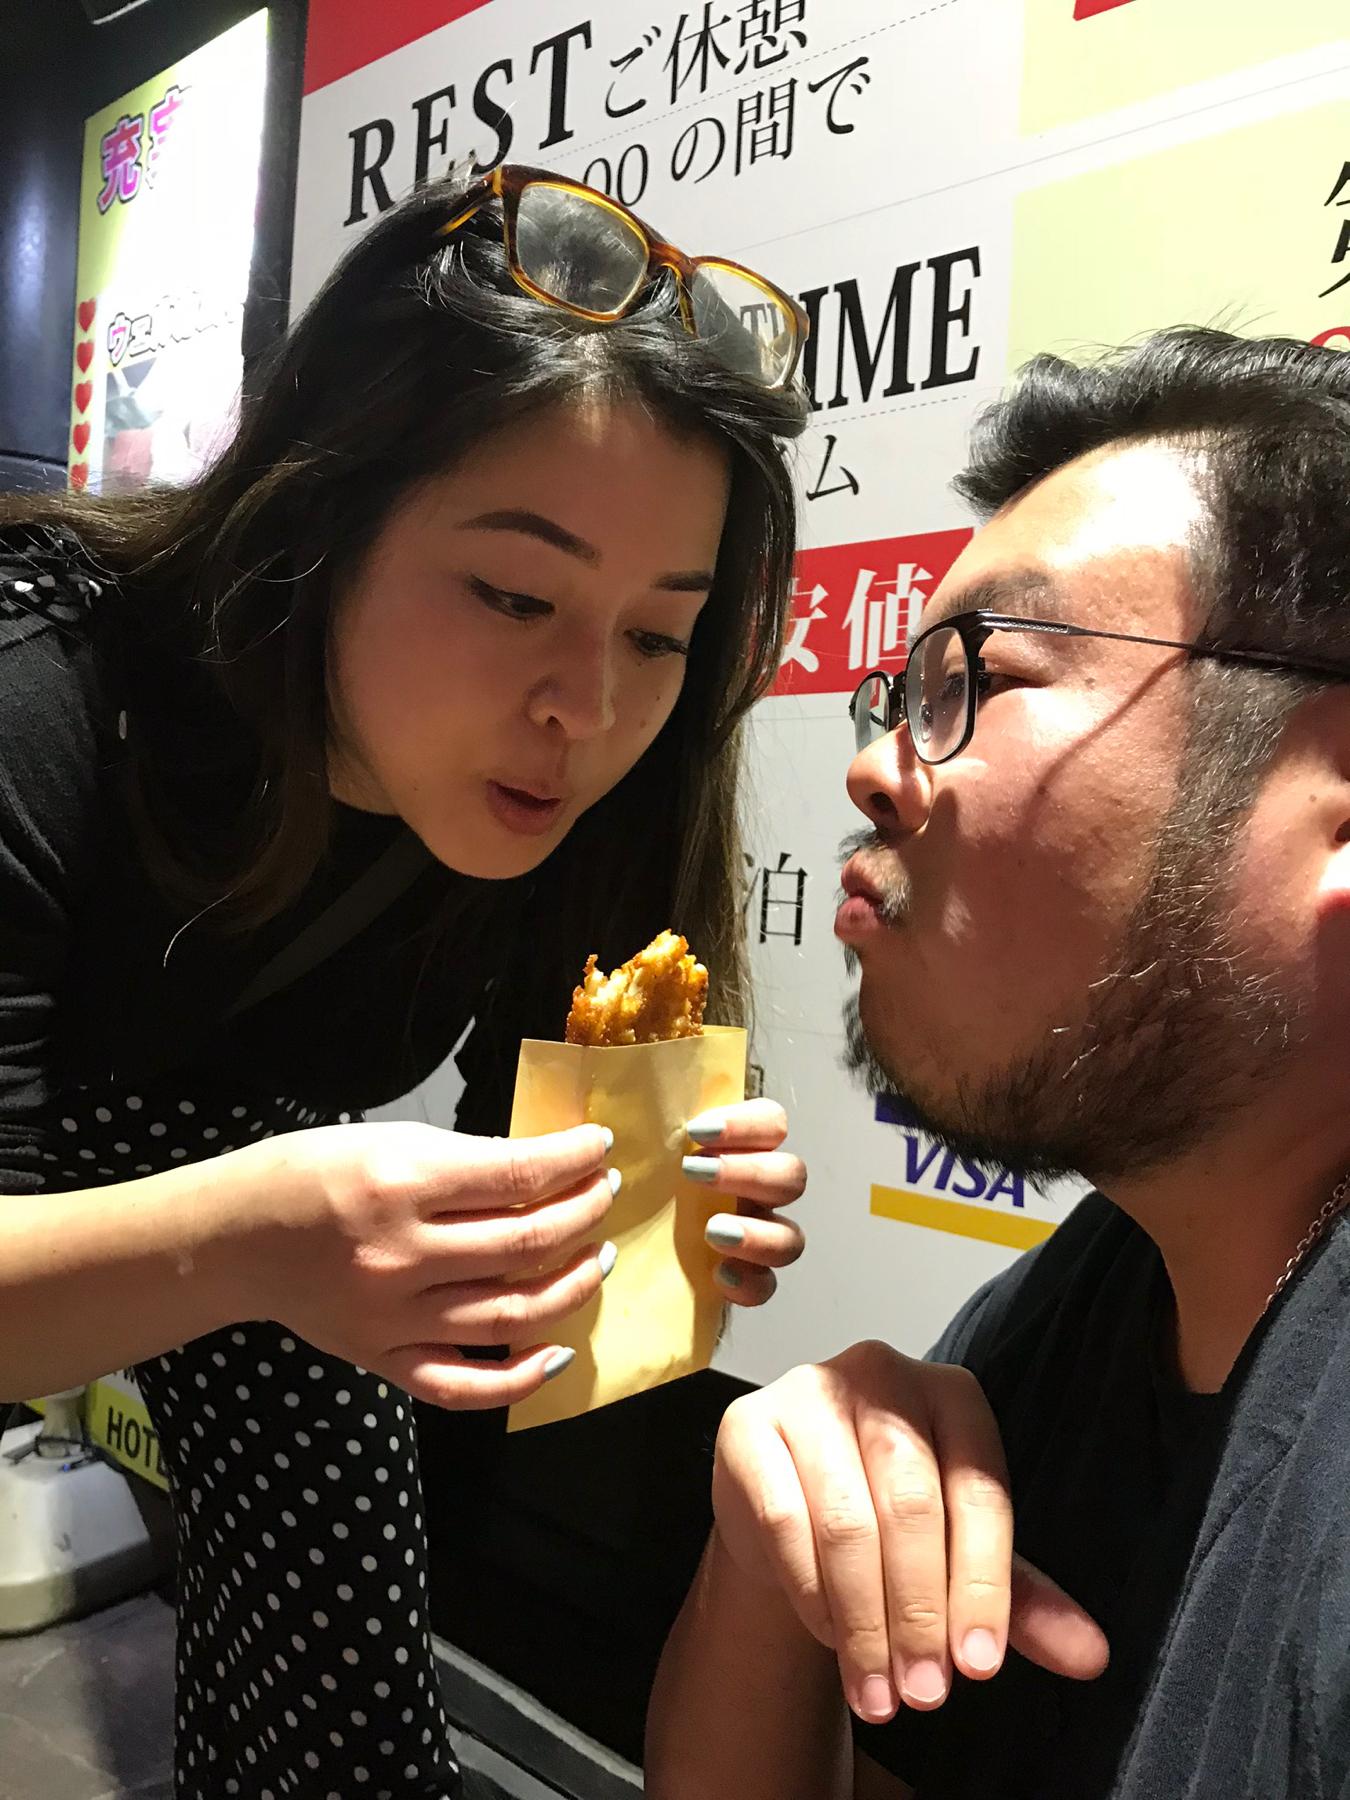 Sharing a gigantic fried thing after a club night in Japan